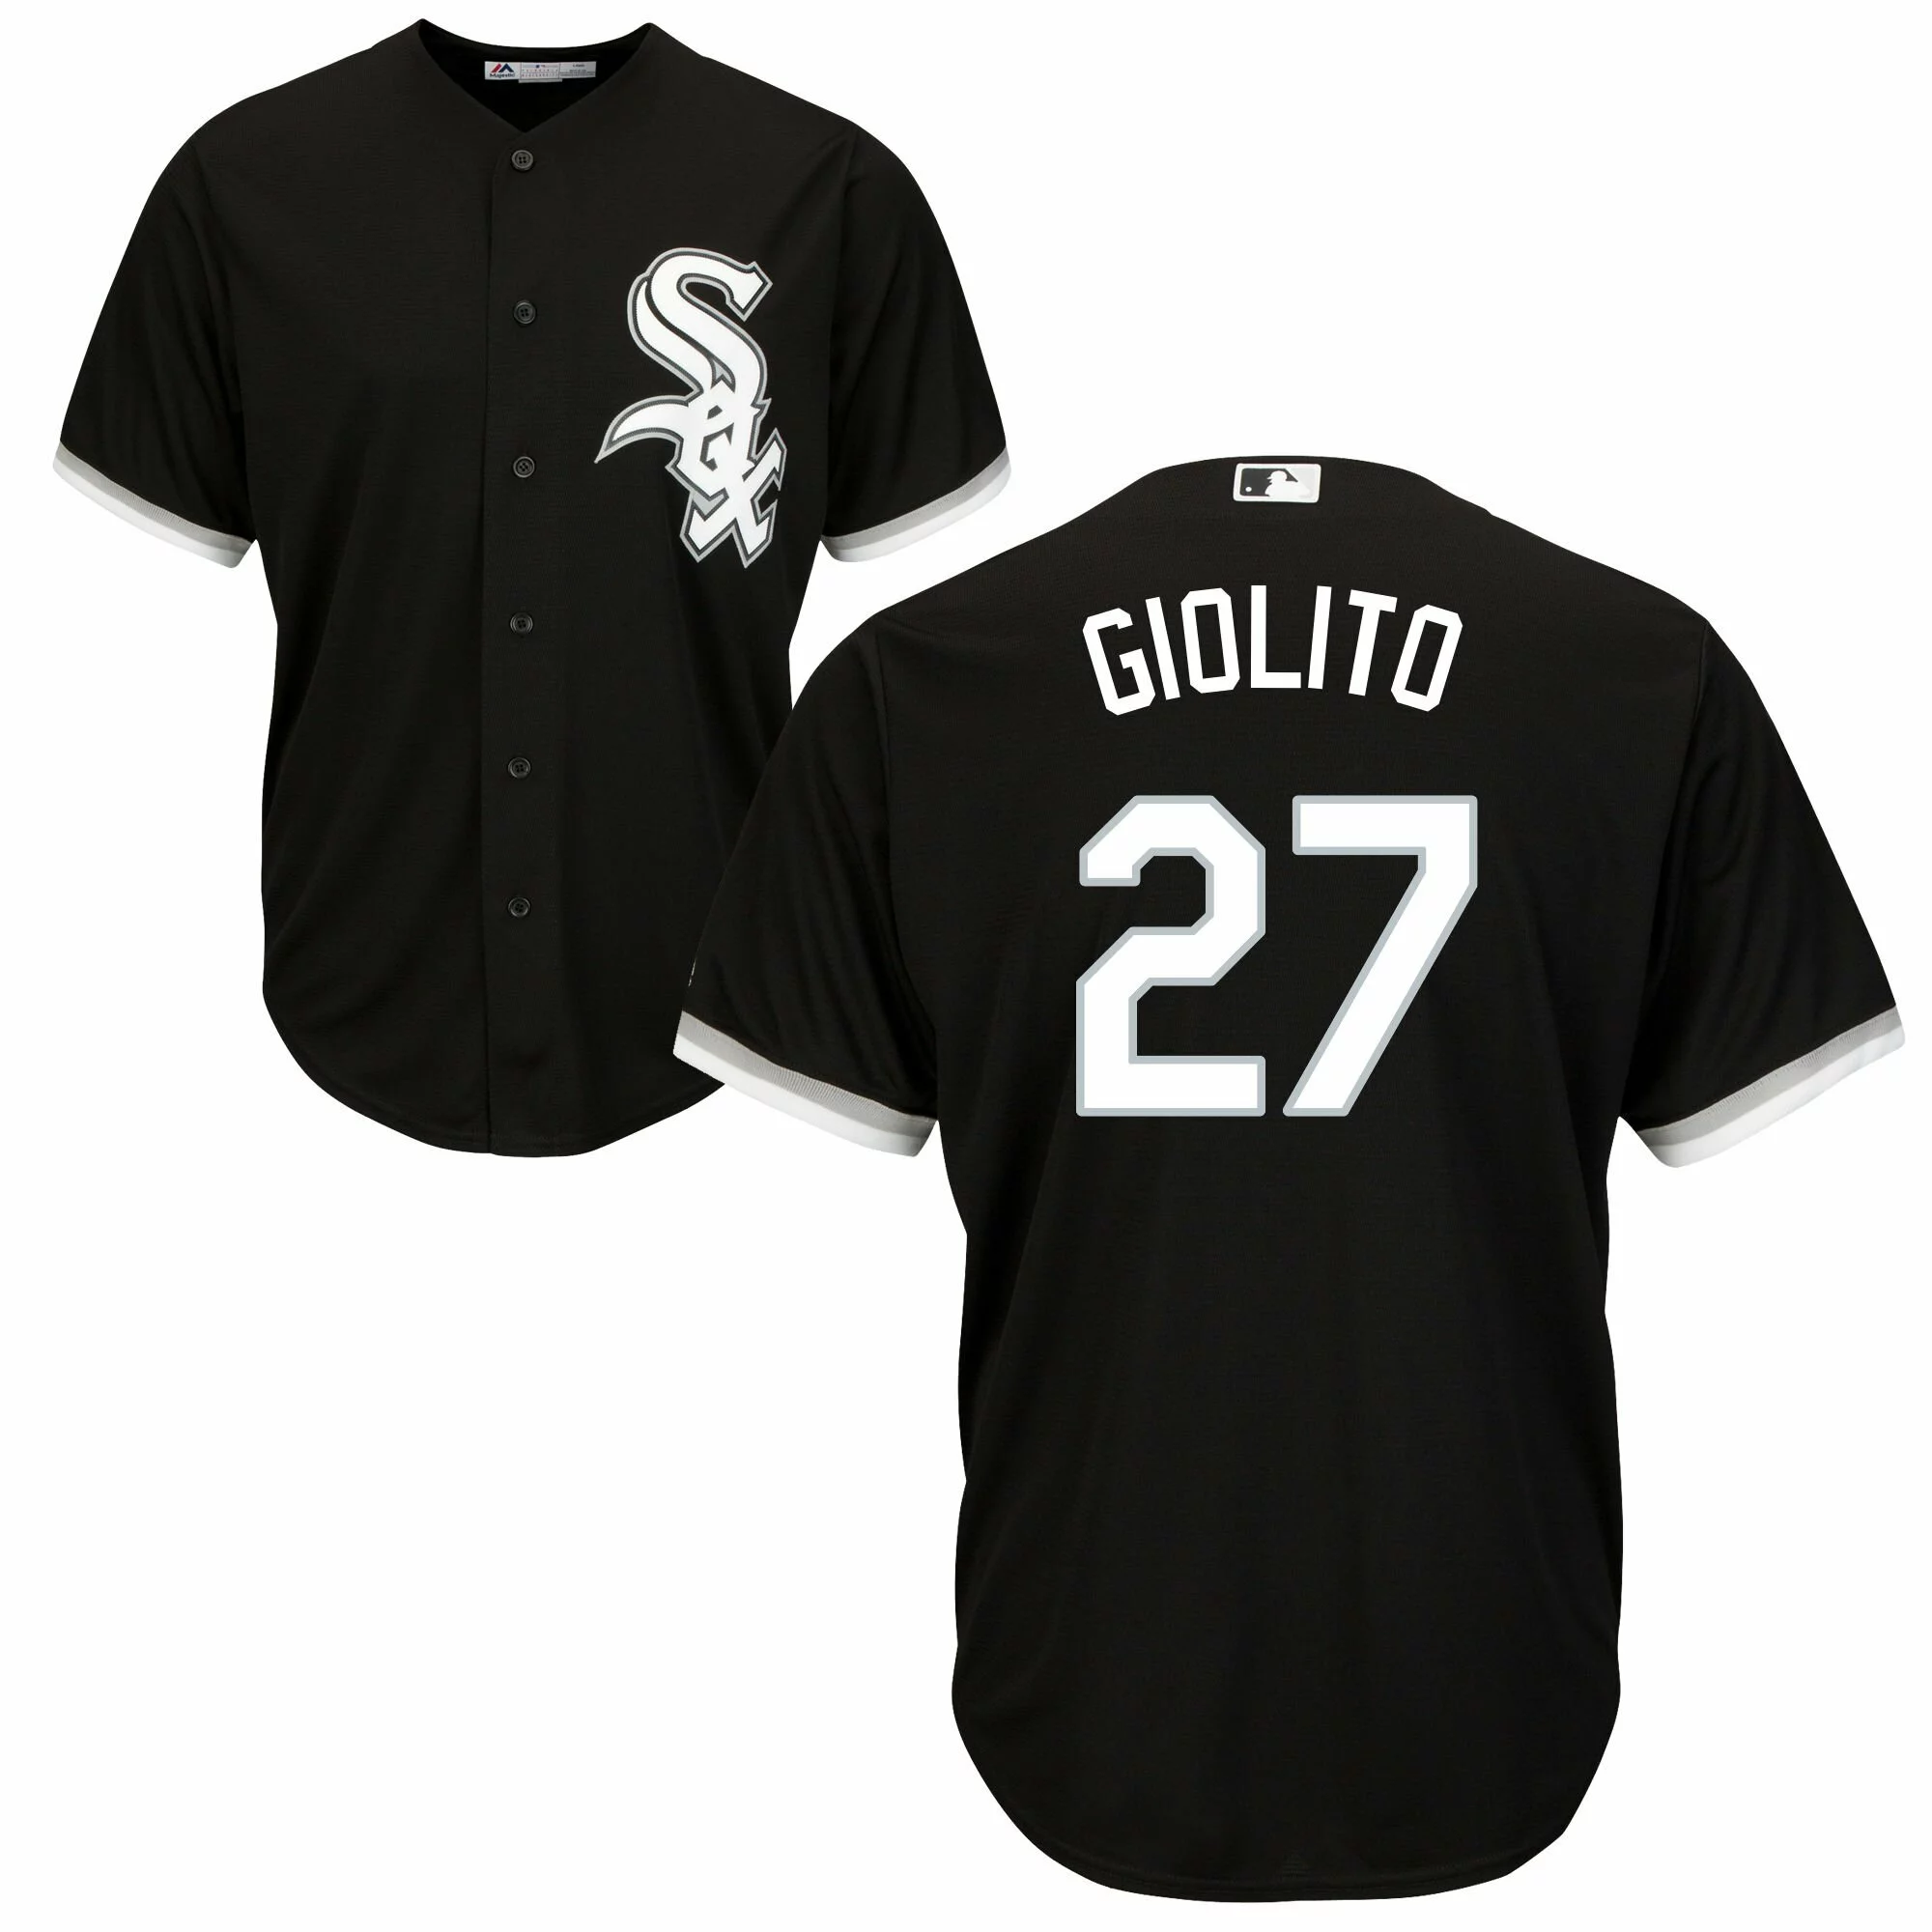 #27 Chicago White Sox Lucas Giolito Authentic Jersey: Black Youth Baseball Alternate Cool Base6571716